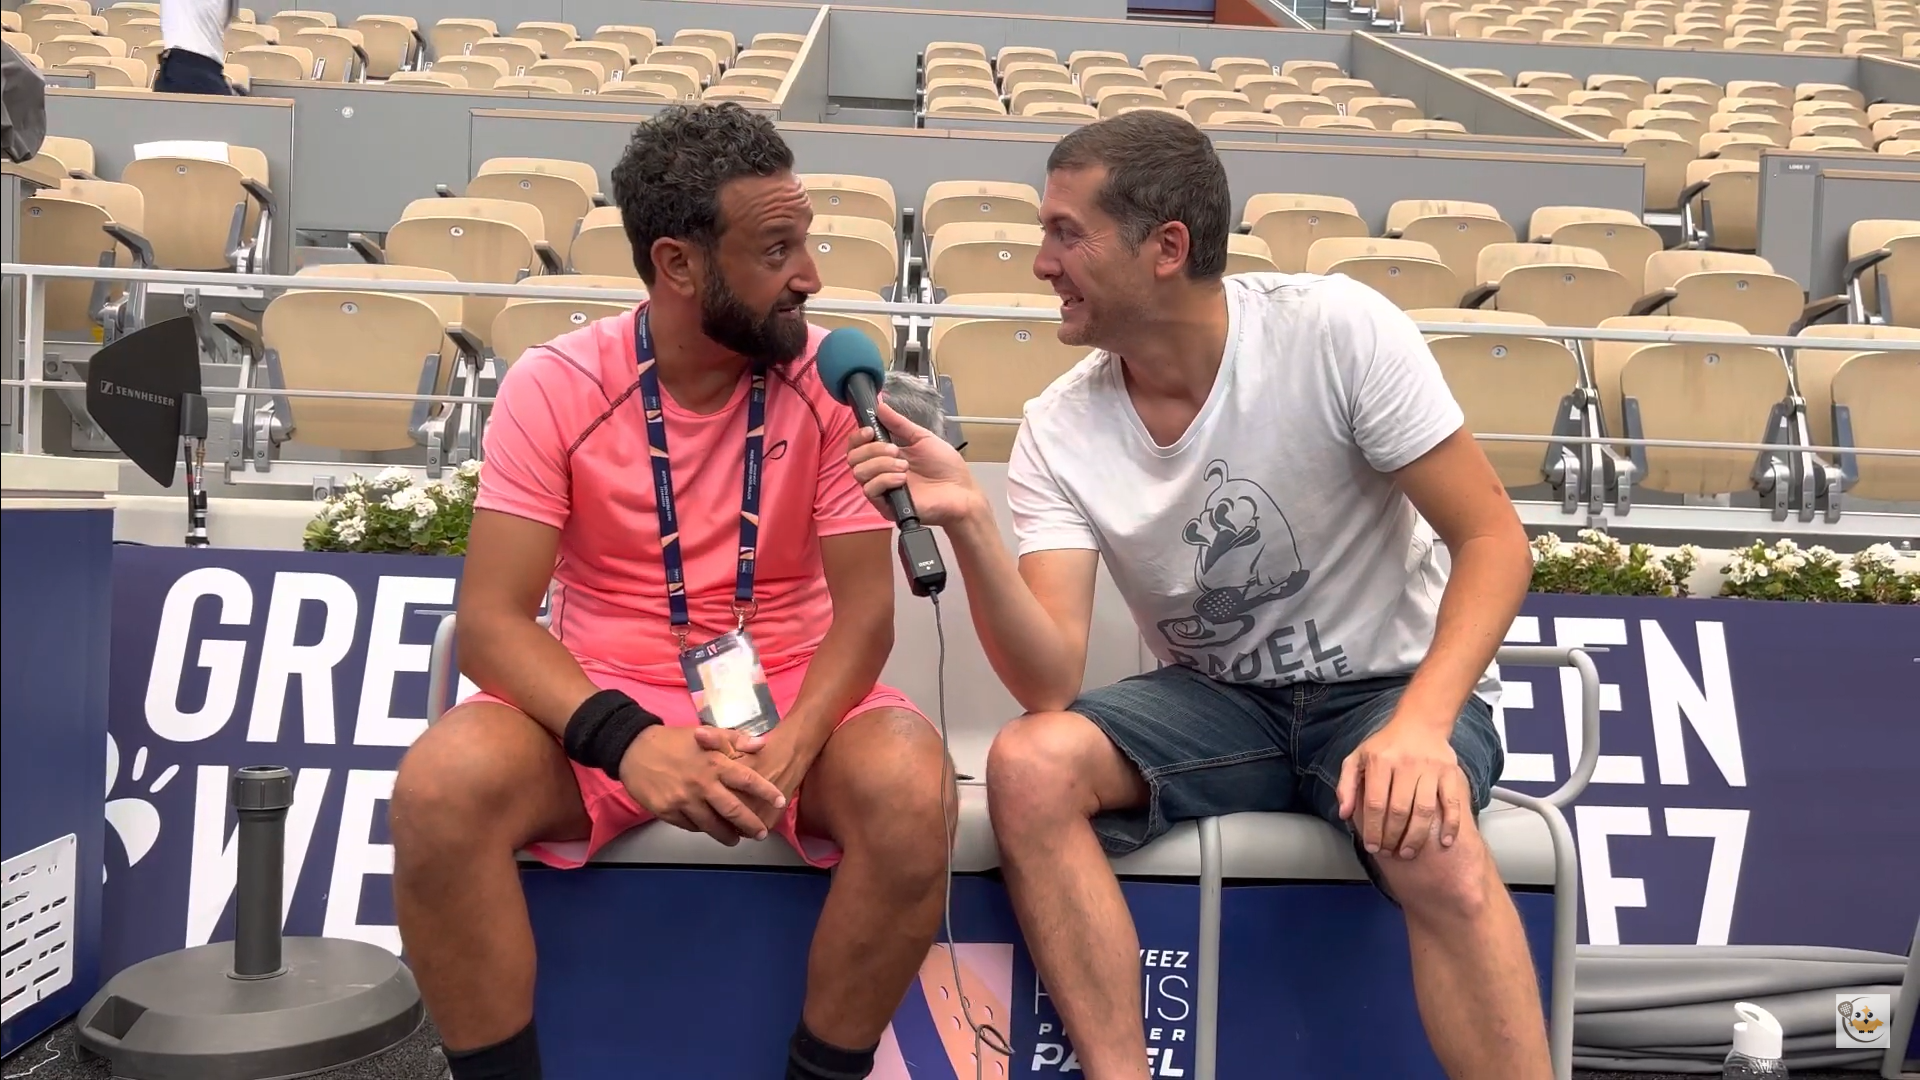 Cyril Hanouna: “I am going to play padel non-stop for 24 hours”